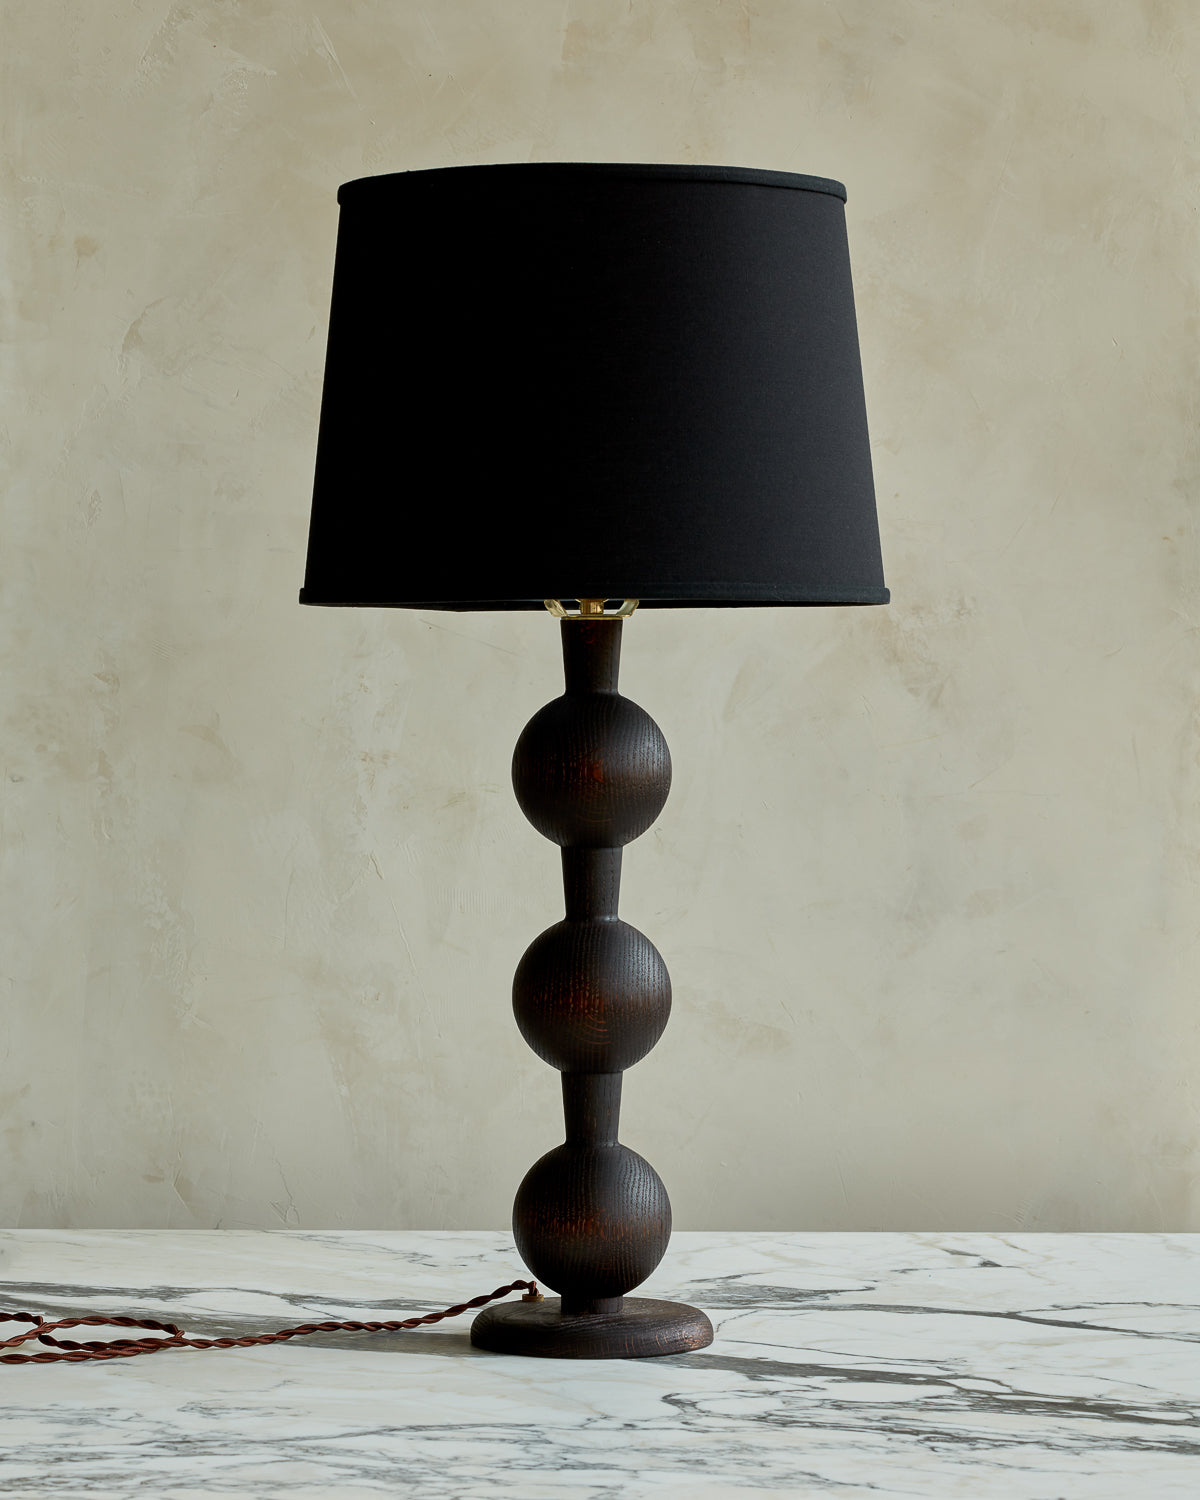 Sculptural solid wood table lamp with barbell design in dark wash finish with black linen shade